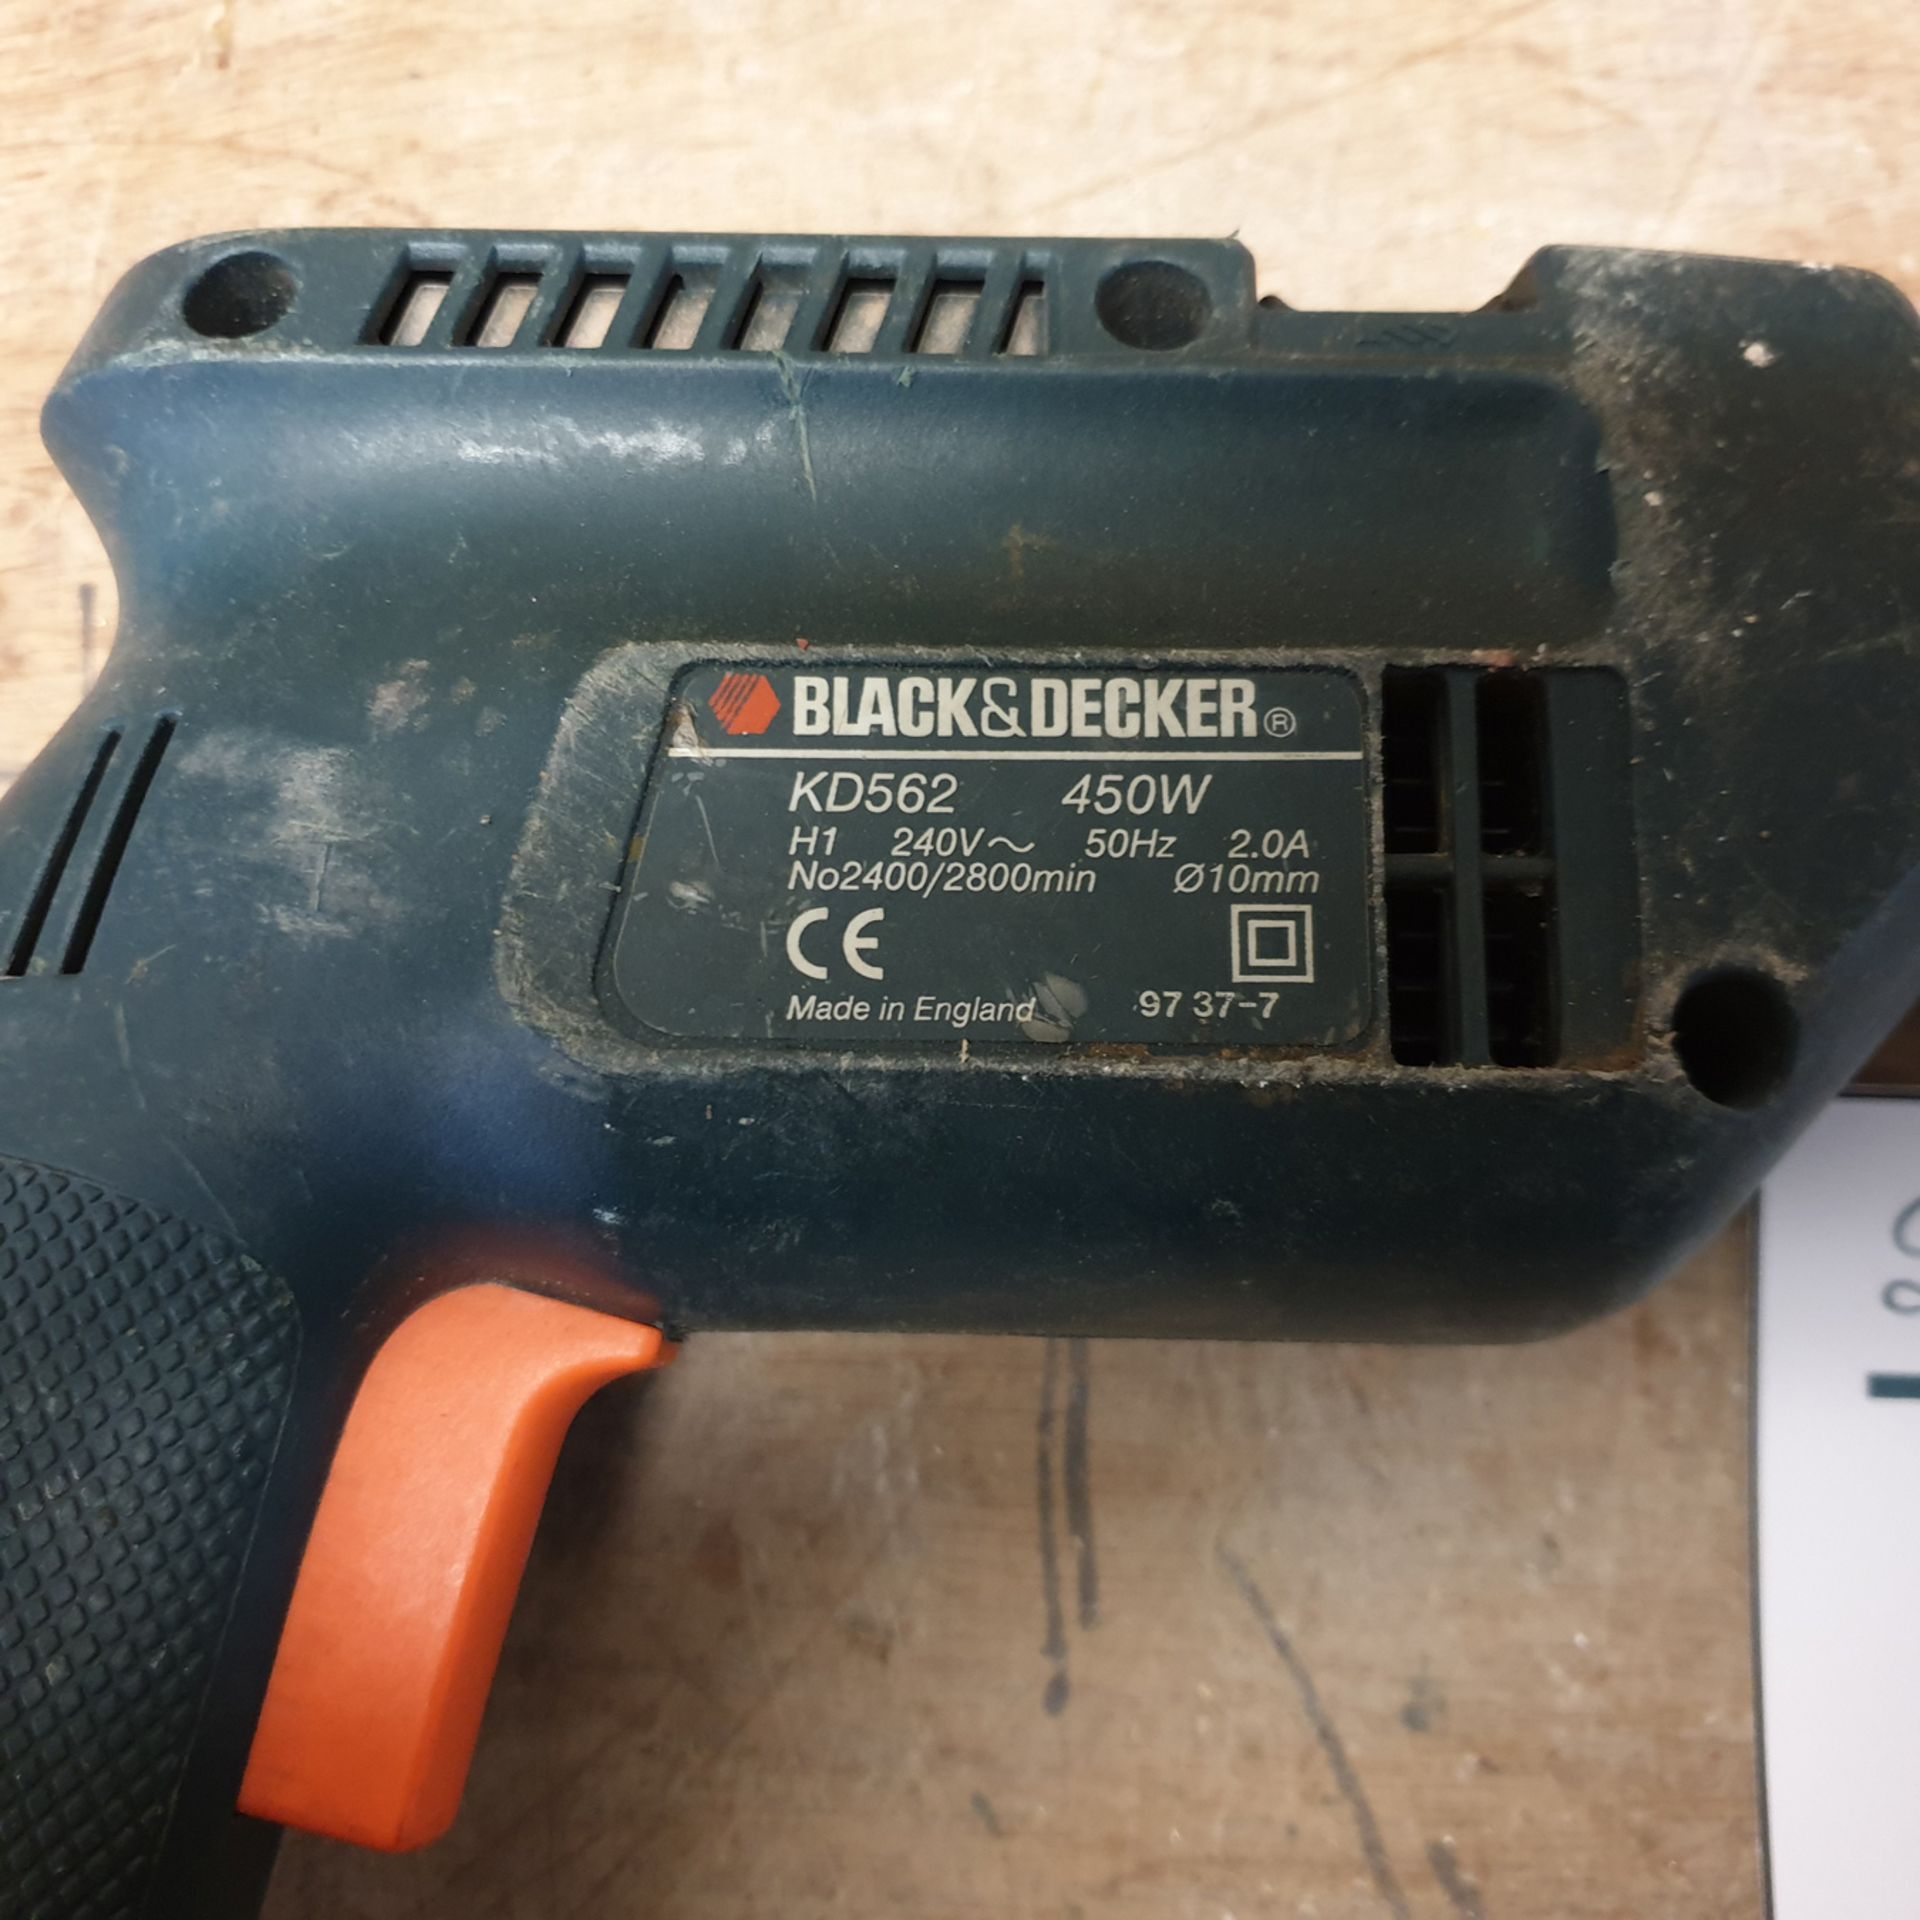 Black & Decker KD562 Hand Drill. Single Phase. - Image 3 of 3